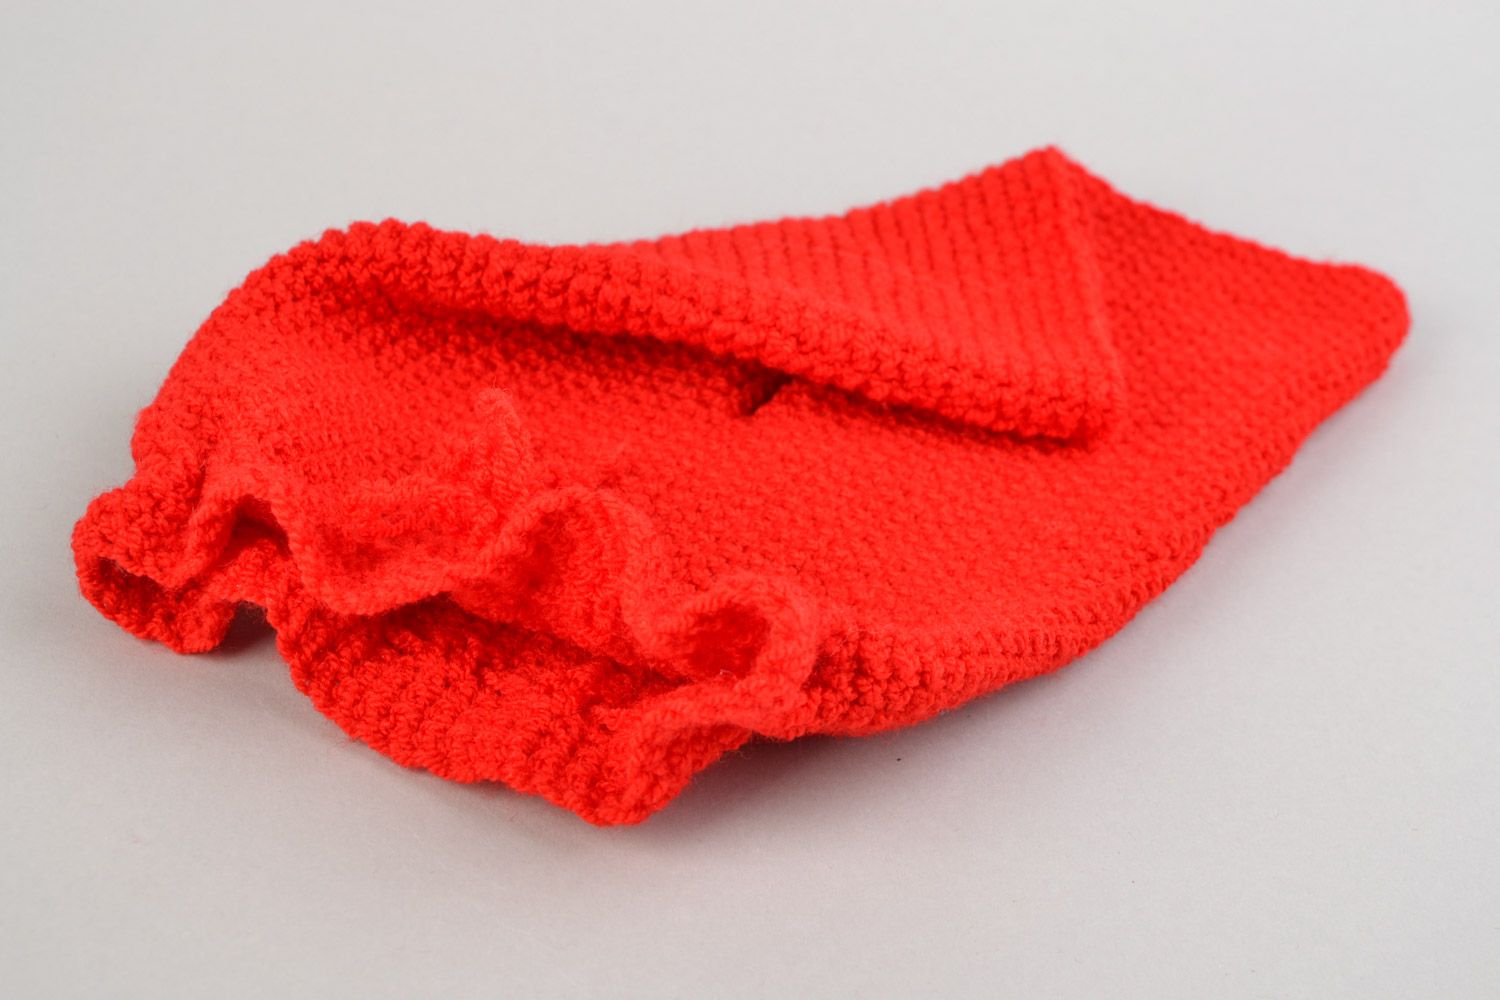 Handmade crocheted stylish red baby pants for kids made of acrylic threads photo 4